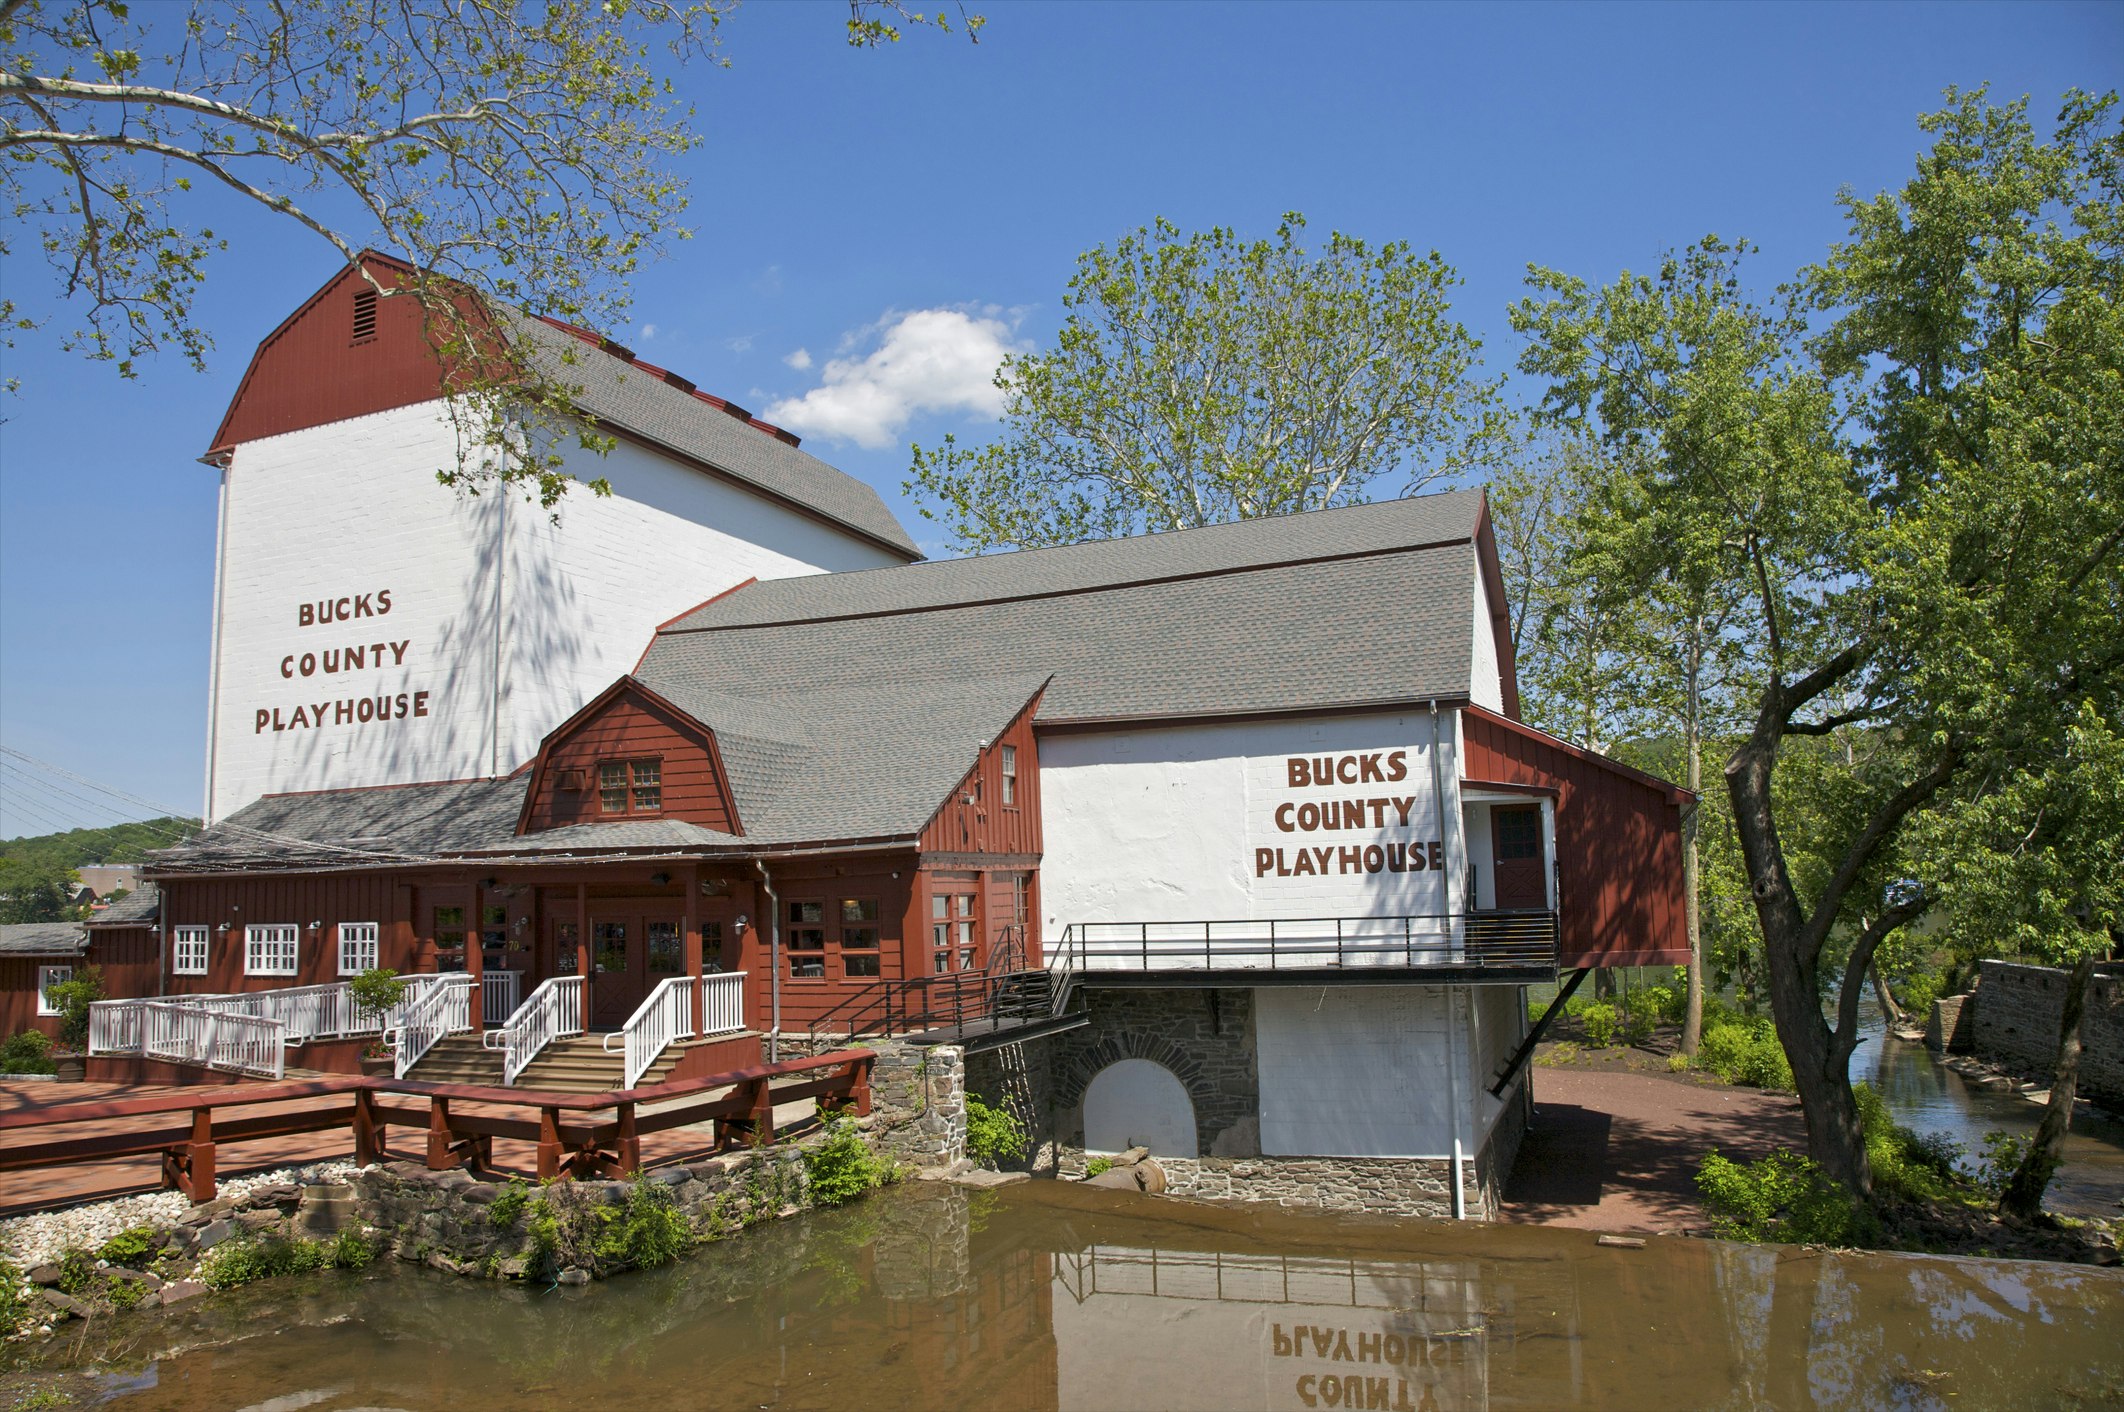 Barn-like red and white theatre near water